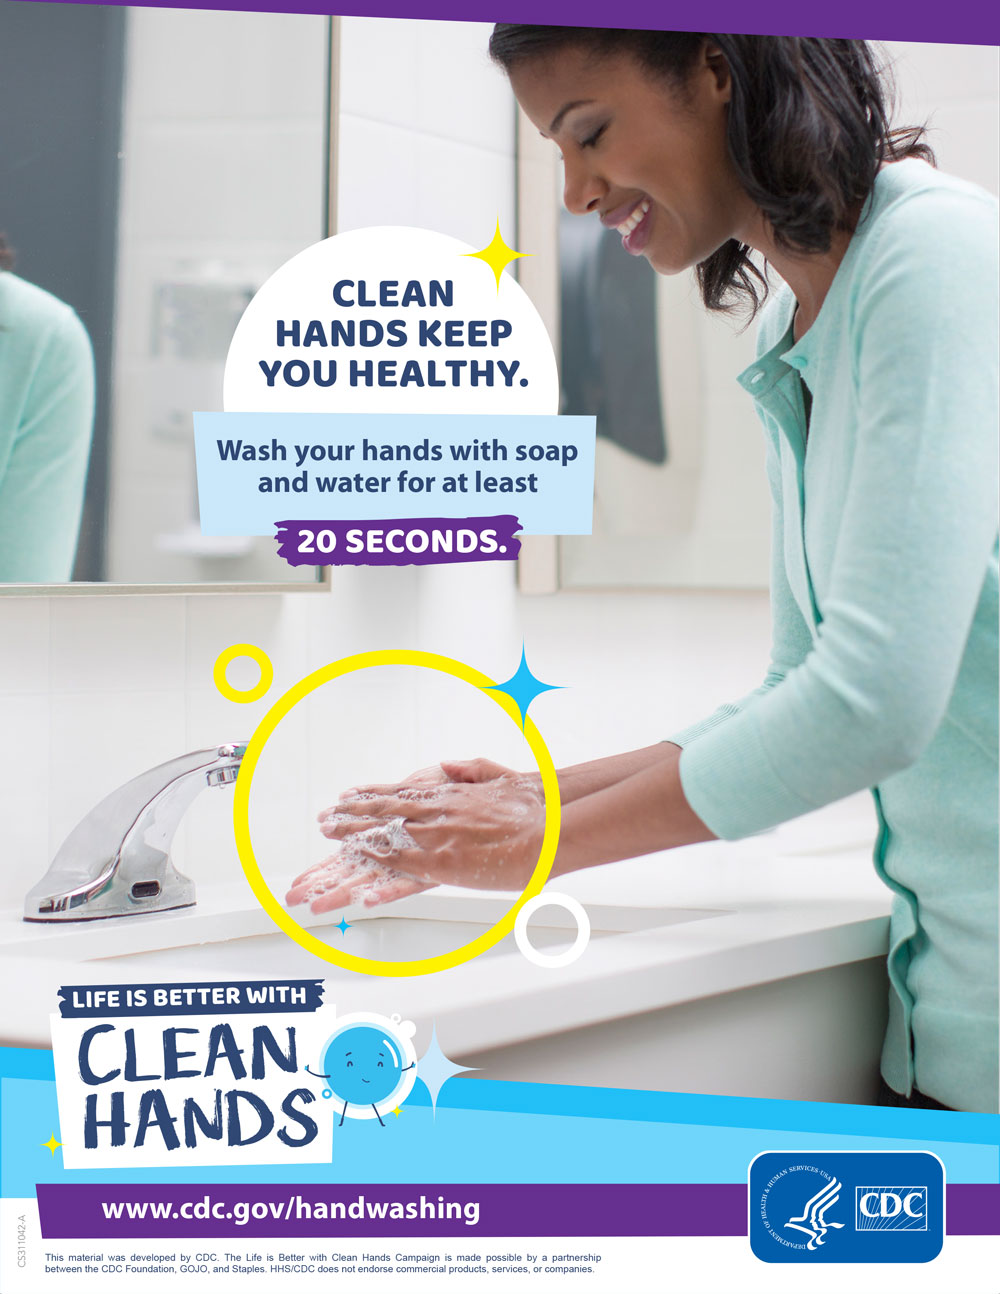 Wash you hands for atleast 20 seconds